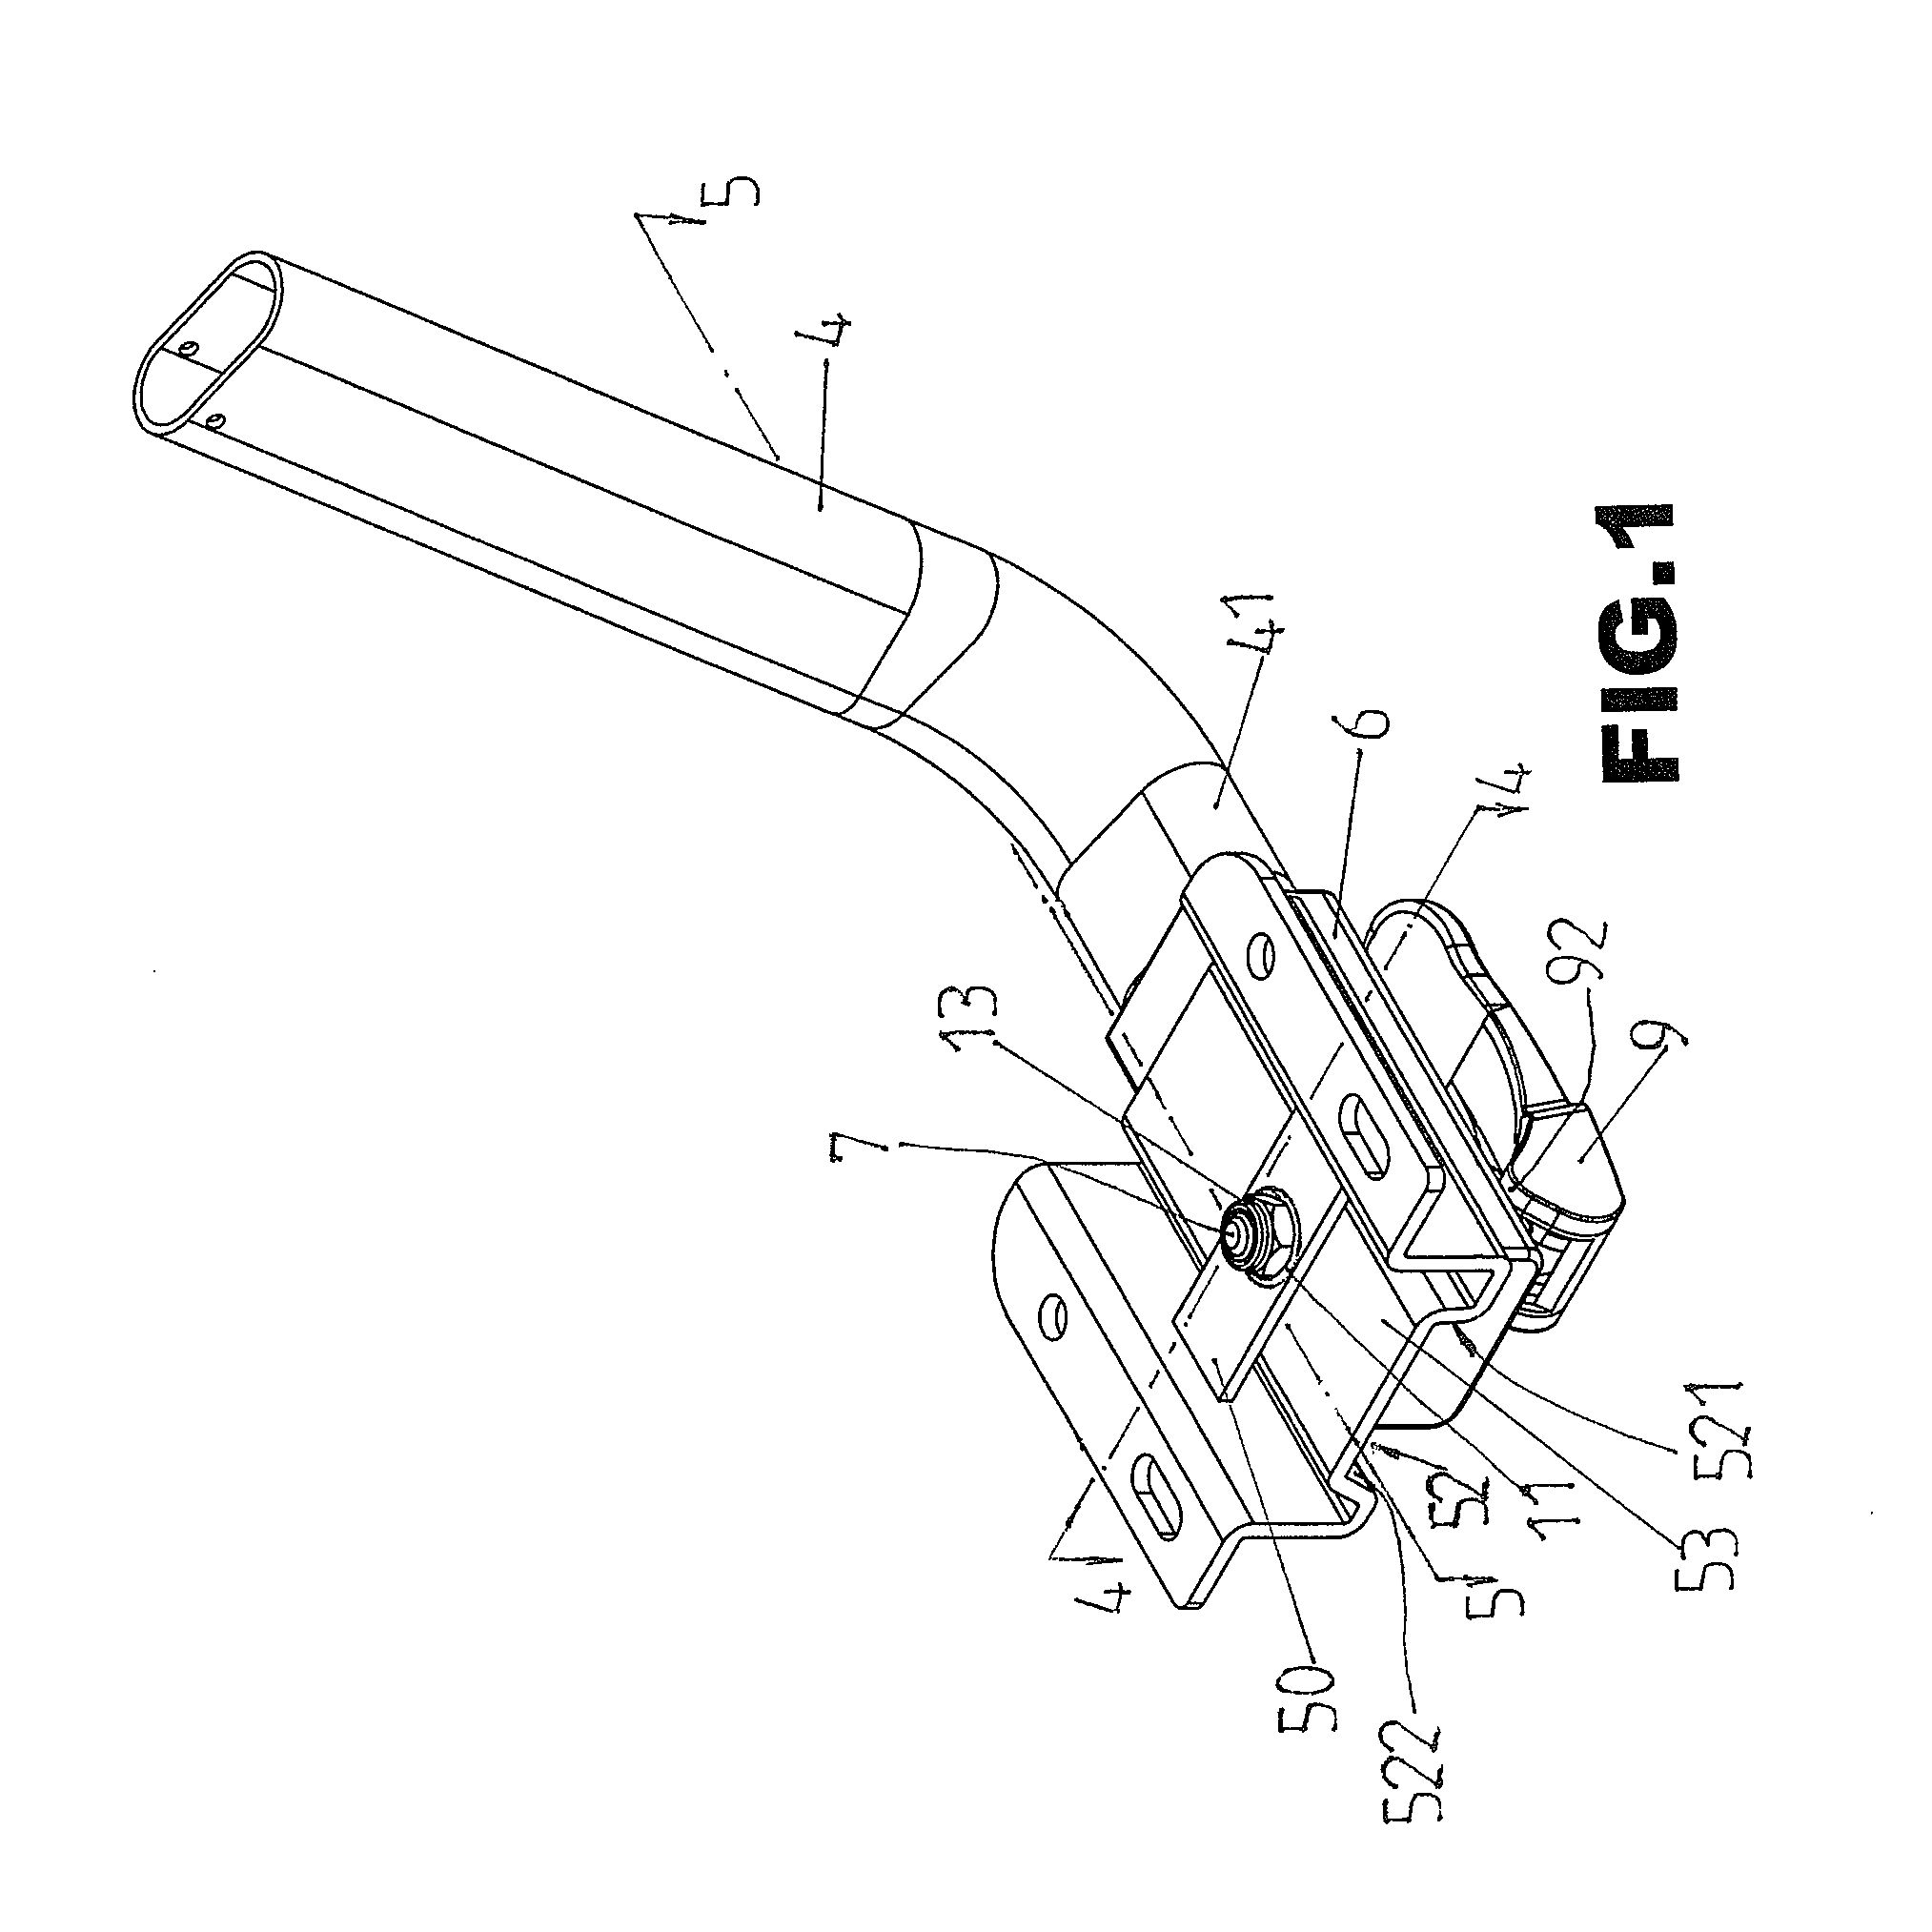 Armrest assembly that can adjust its leftward and rightward positions